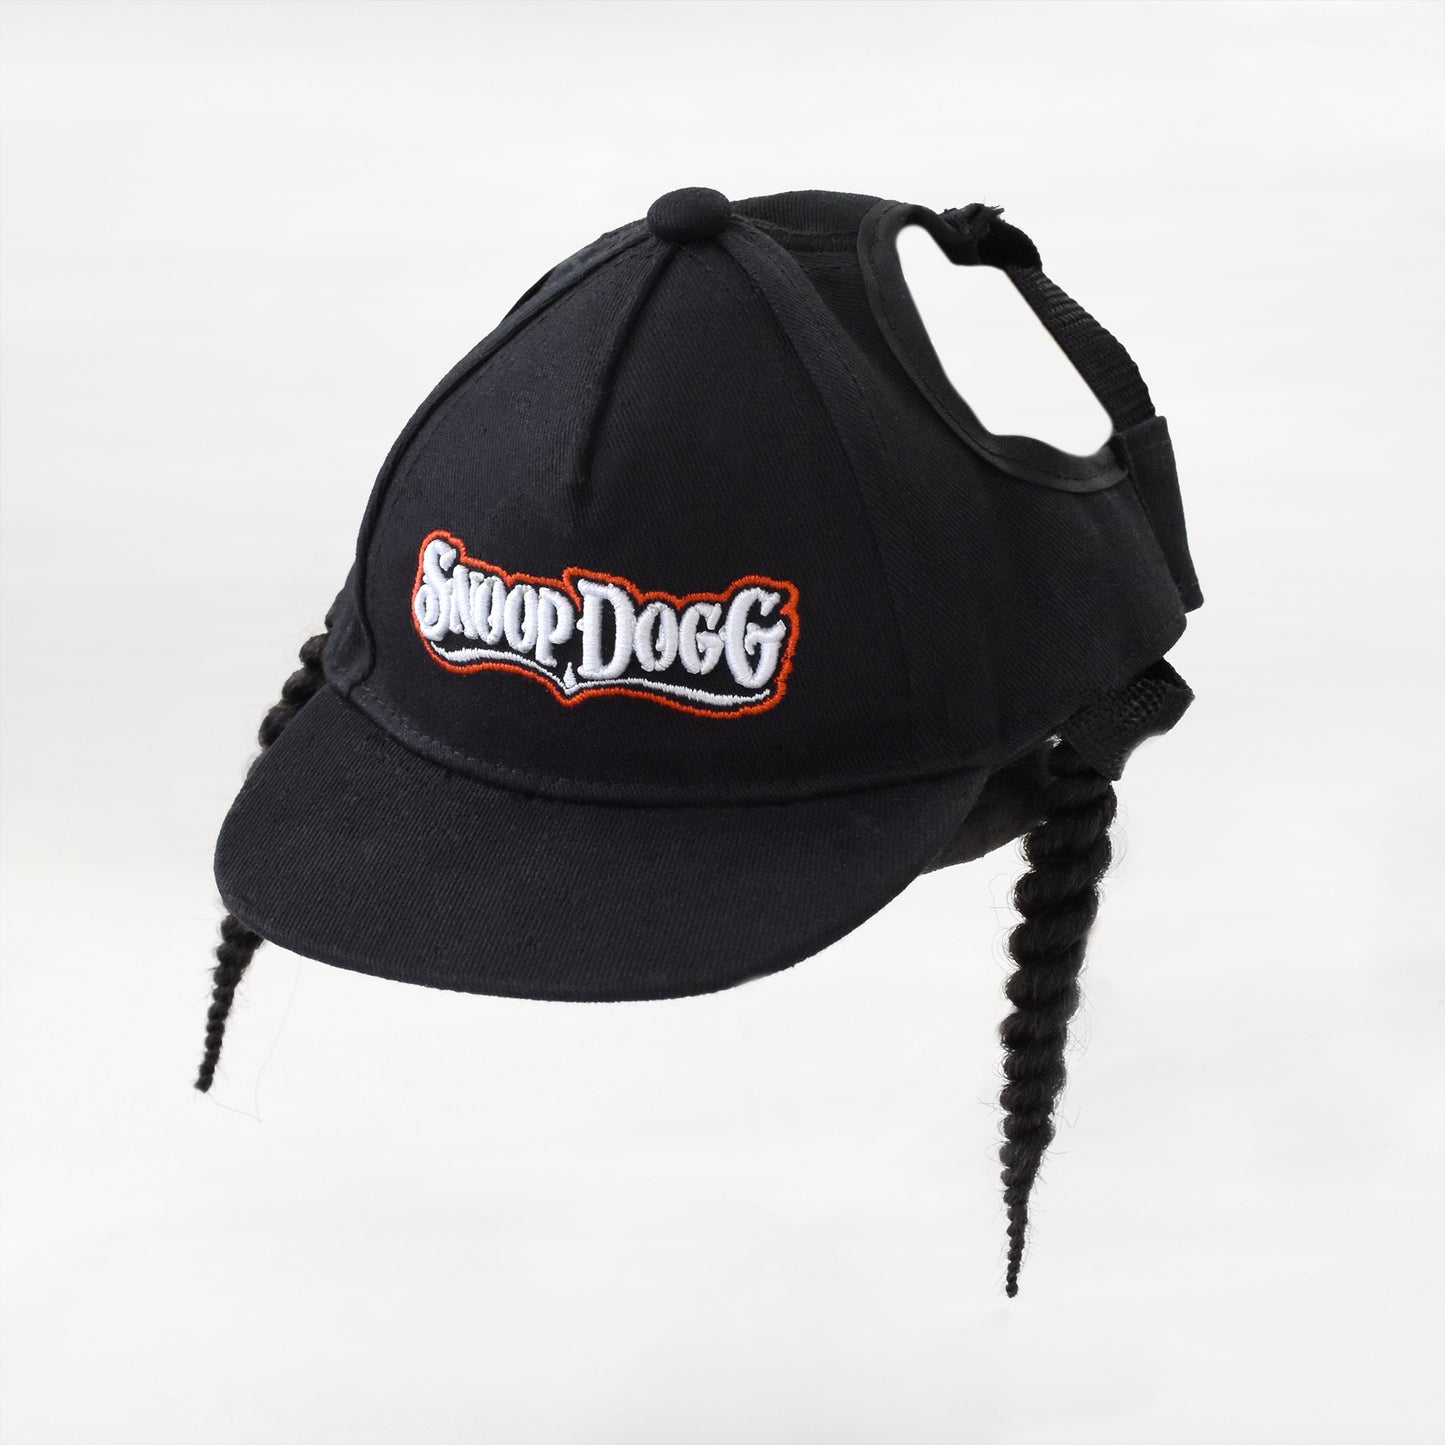 Product flat lay of the Classic Snoop Deluxe Pet Baseball Hat.